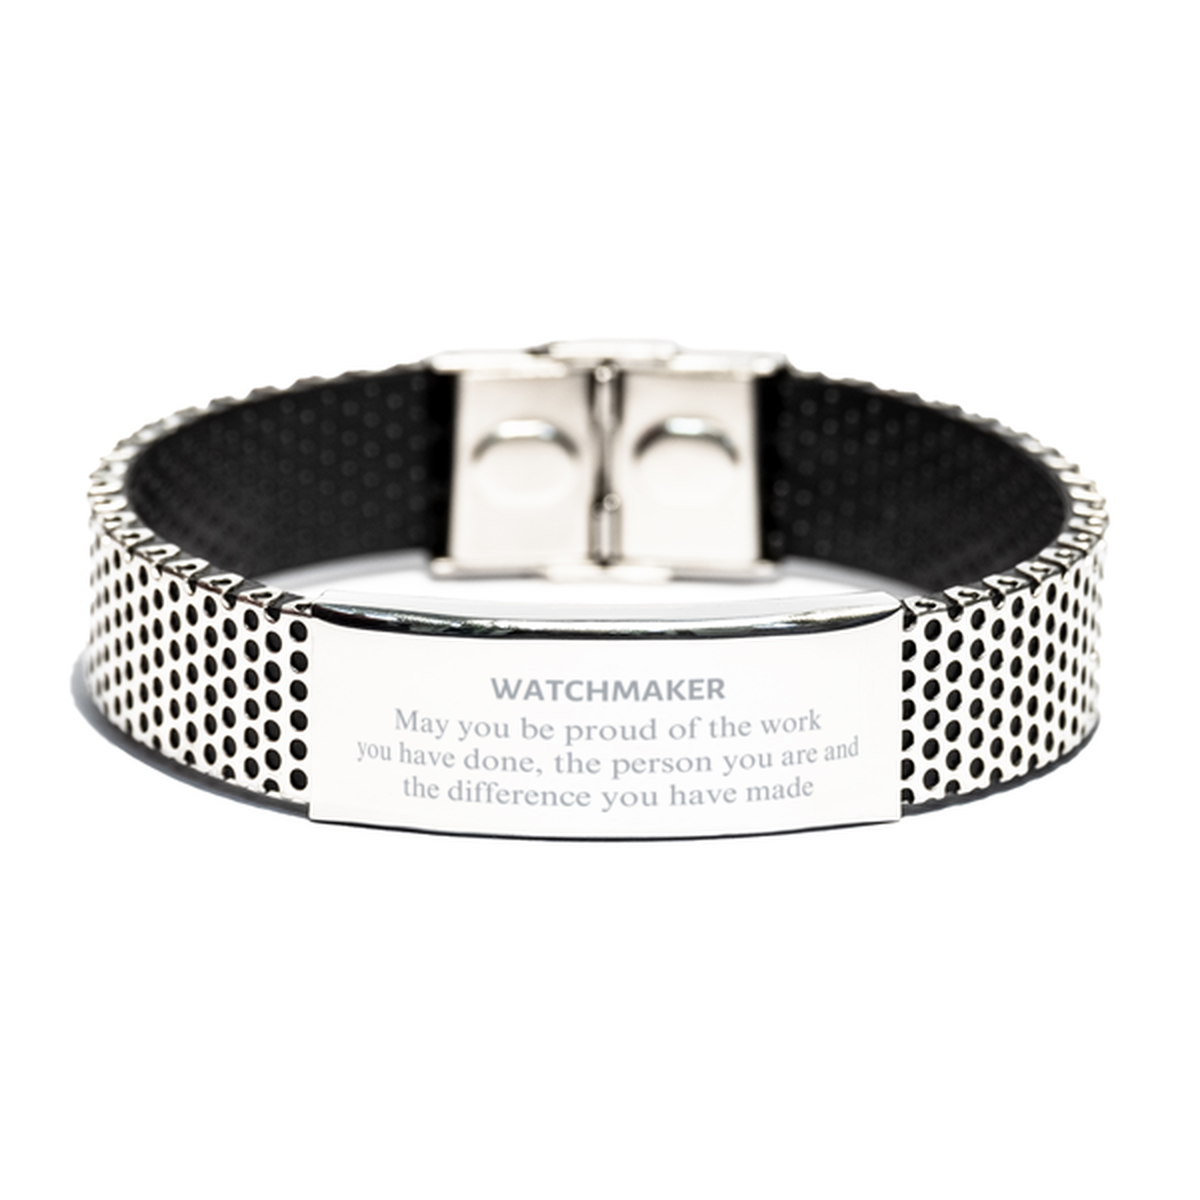 Watchmaker May you be proud of the work you have done, Retirement Watchmaker Stainless Steel Bracelet for Colleague Appreciation Gifts Amazing for Watchmaker